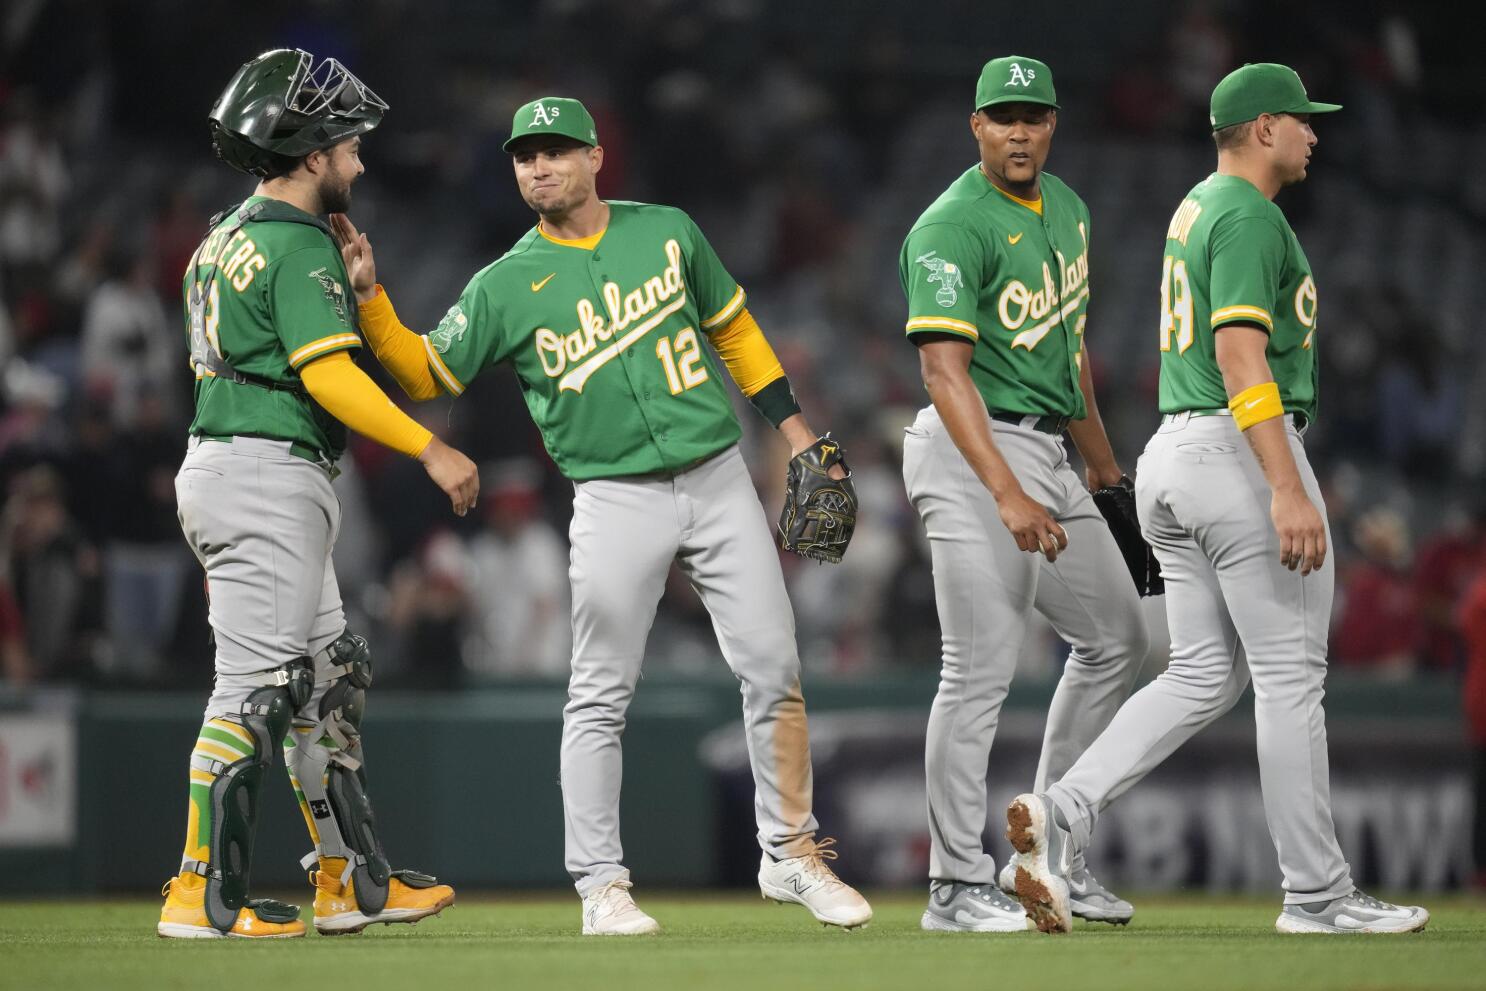 So the Oakland A's want to move into Dodger territory?